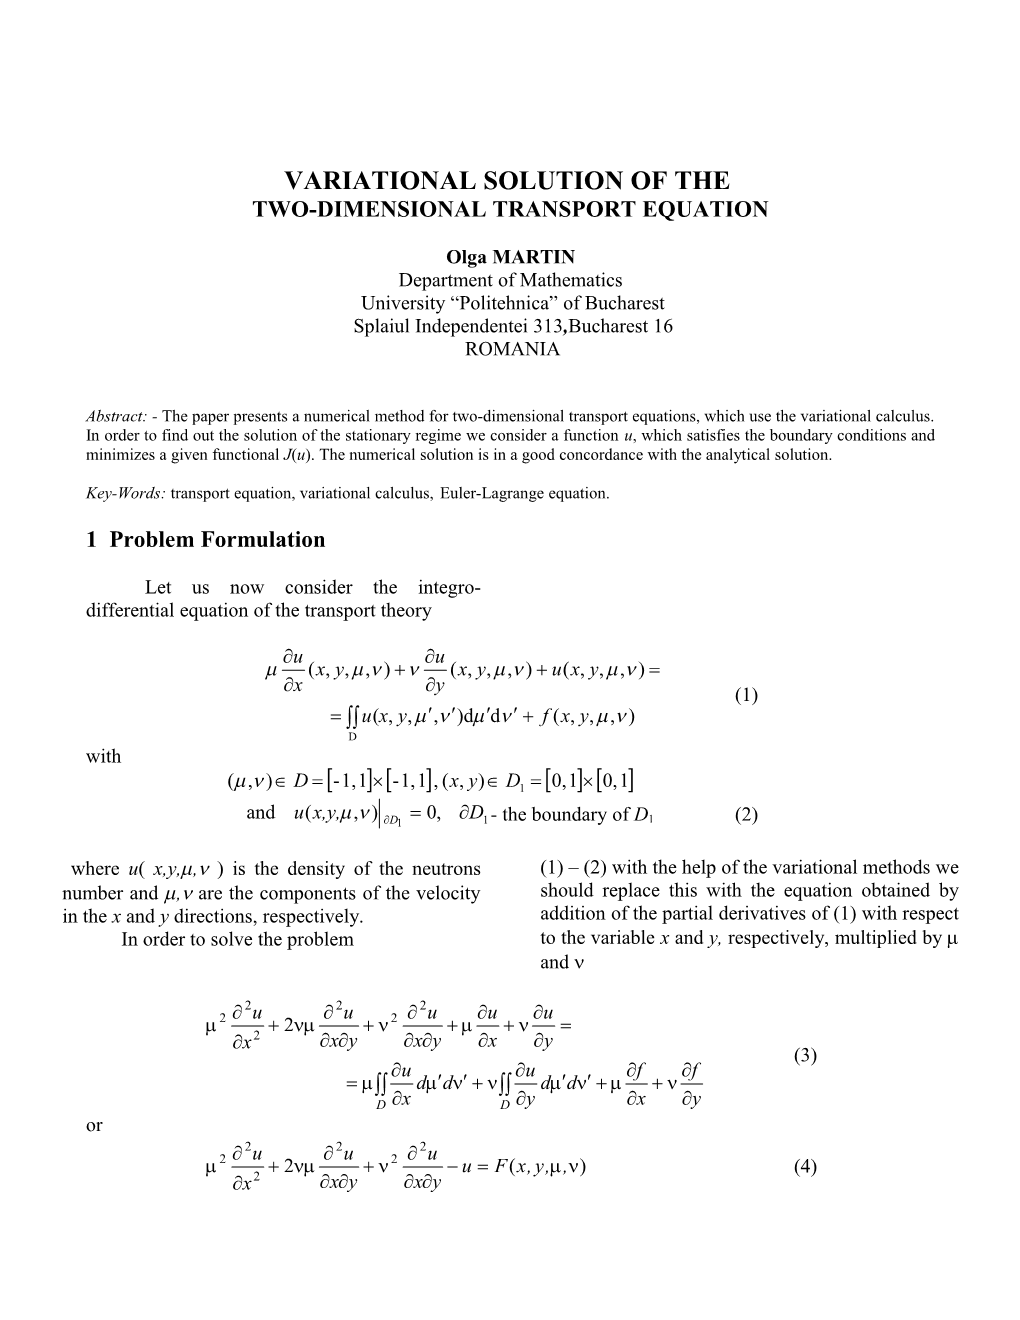 Variational Solution of The